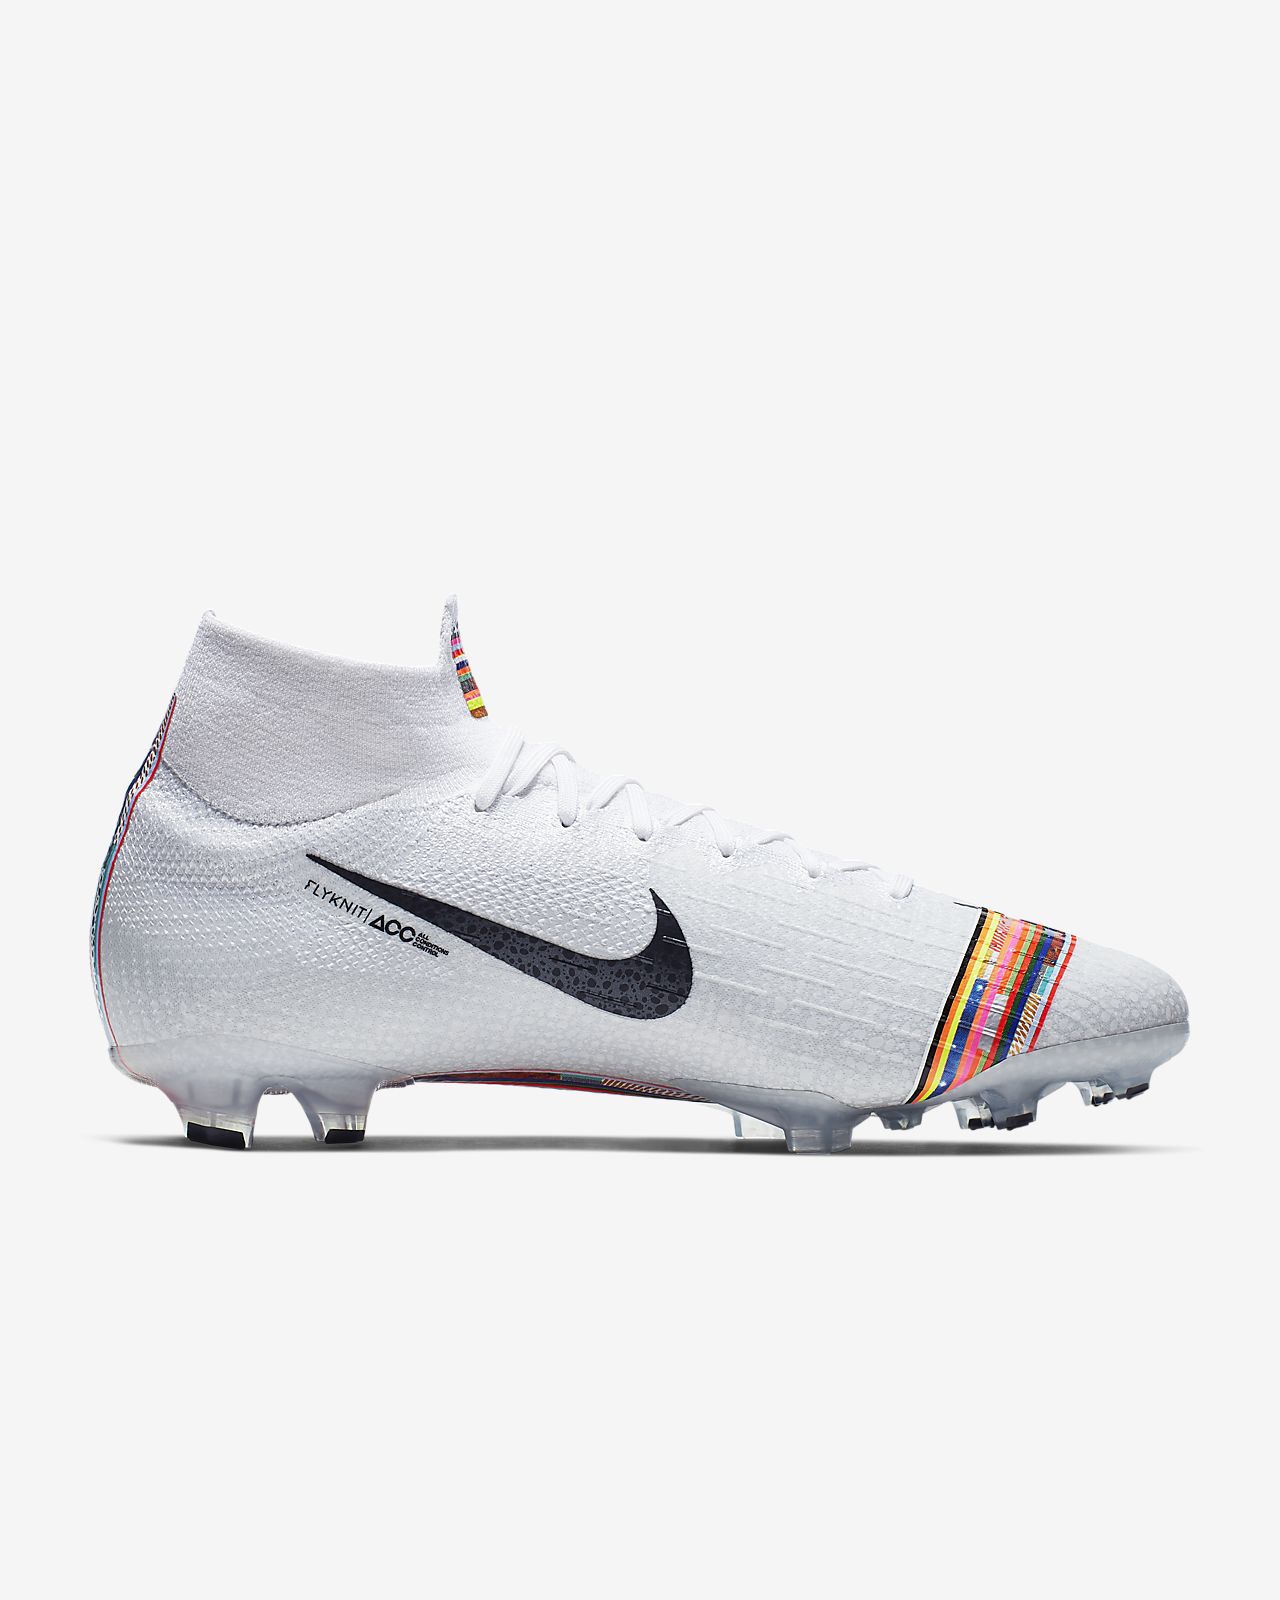 Nike Mercurial Buyers Guide Superfly, Vapor, Veloce & Victory